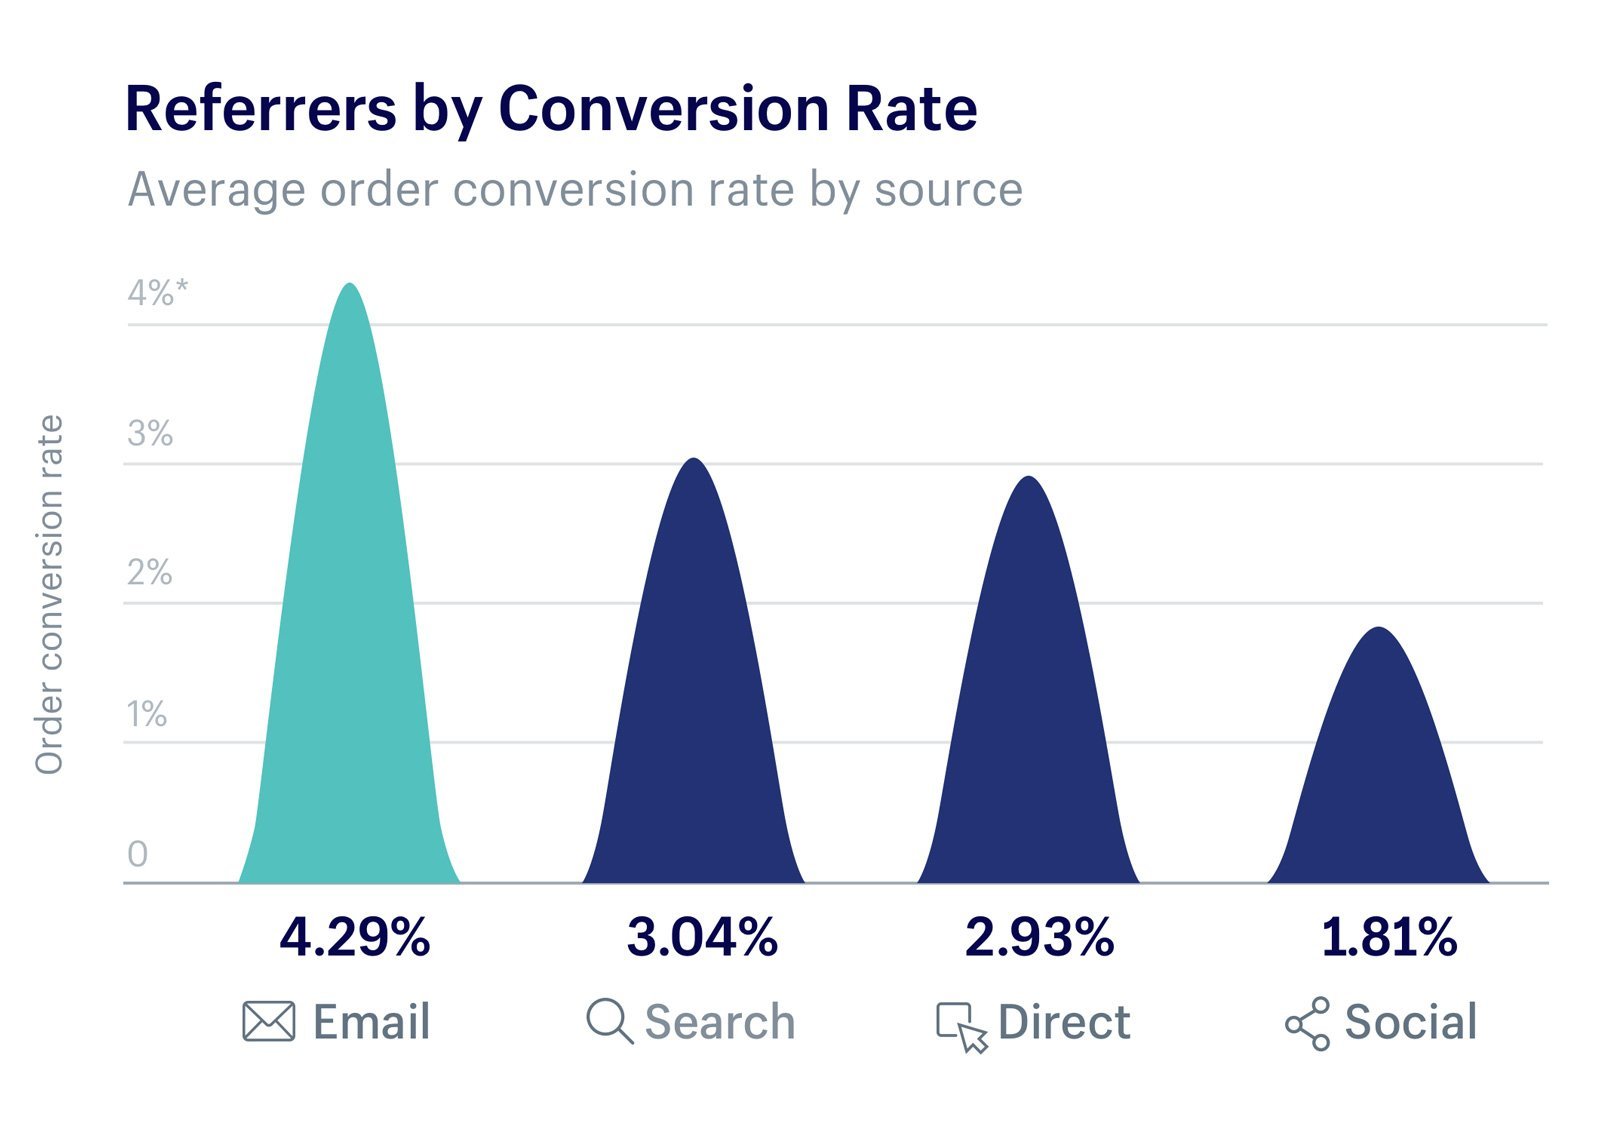 Conversion order rate for email marketing